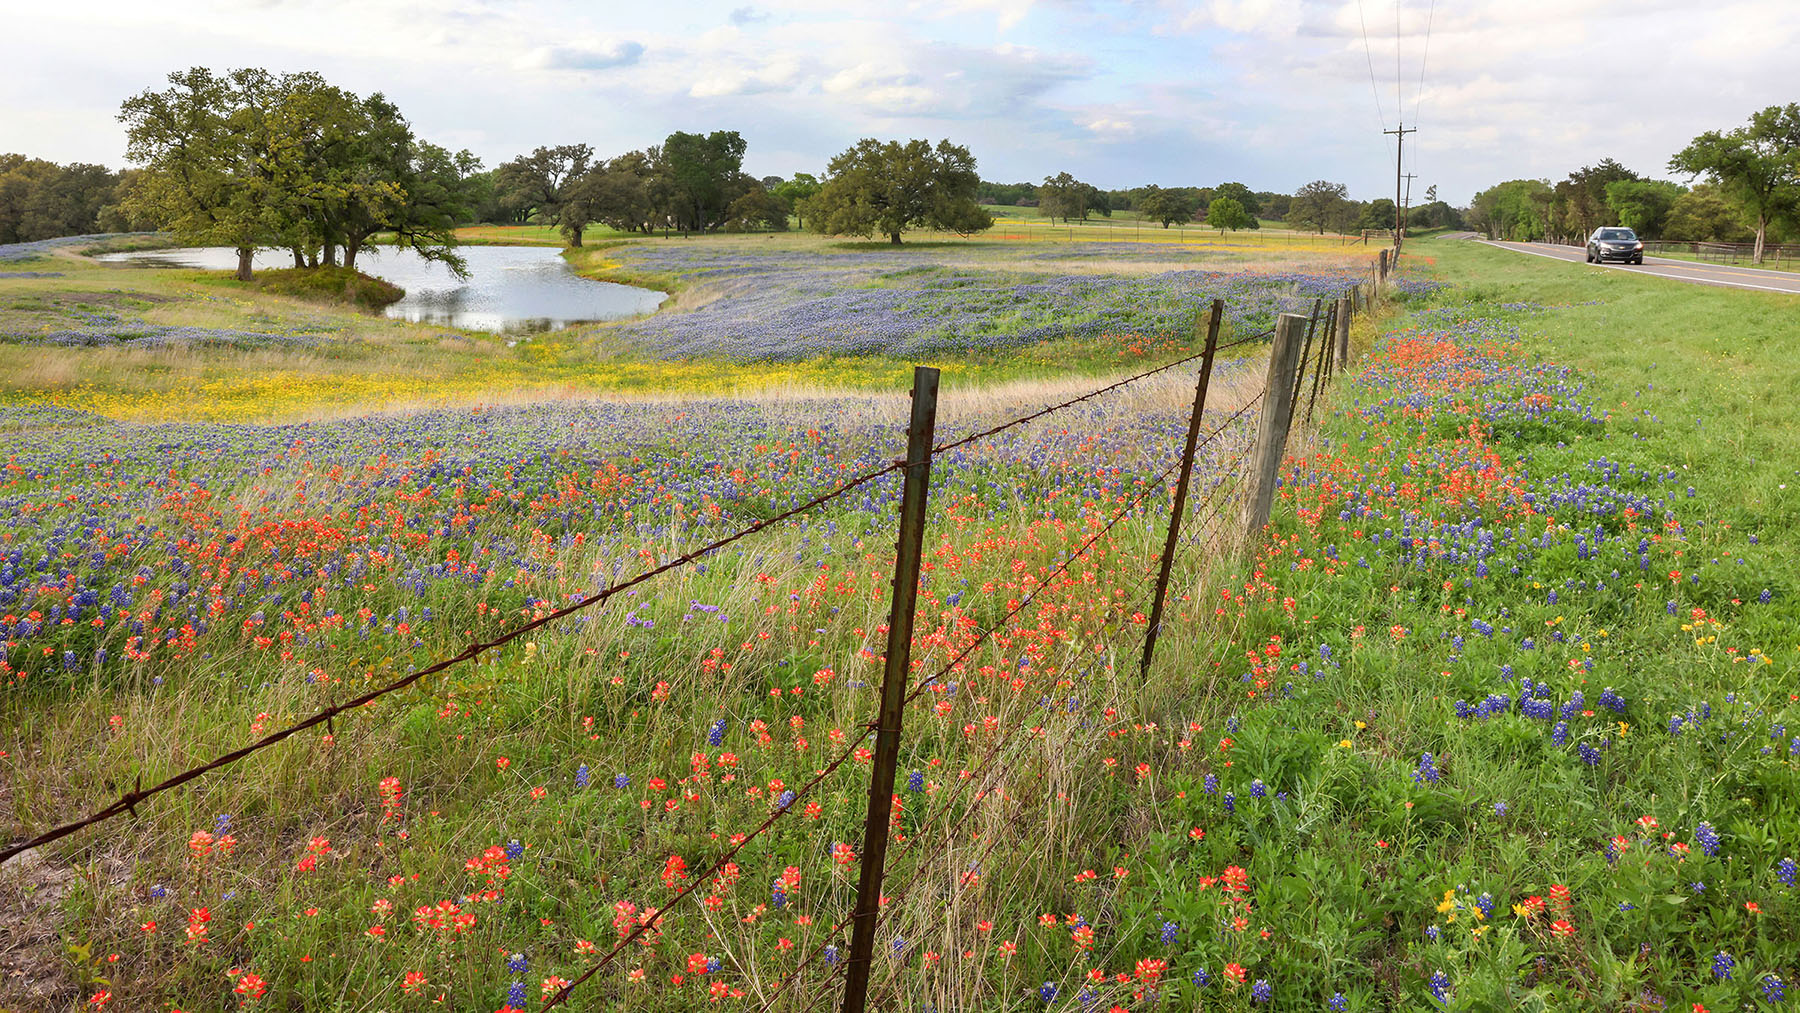 A collection of blue, yellow, and red wildflowers in sea of green grass beneath a barbed wire fence